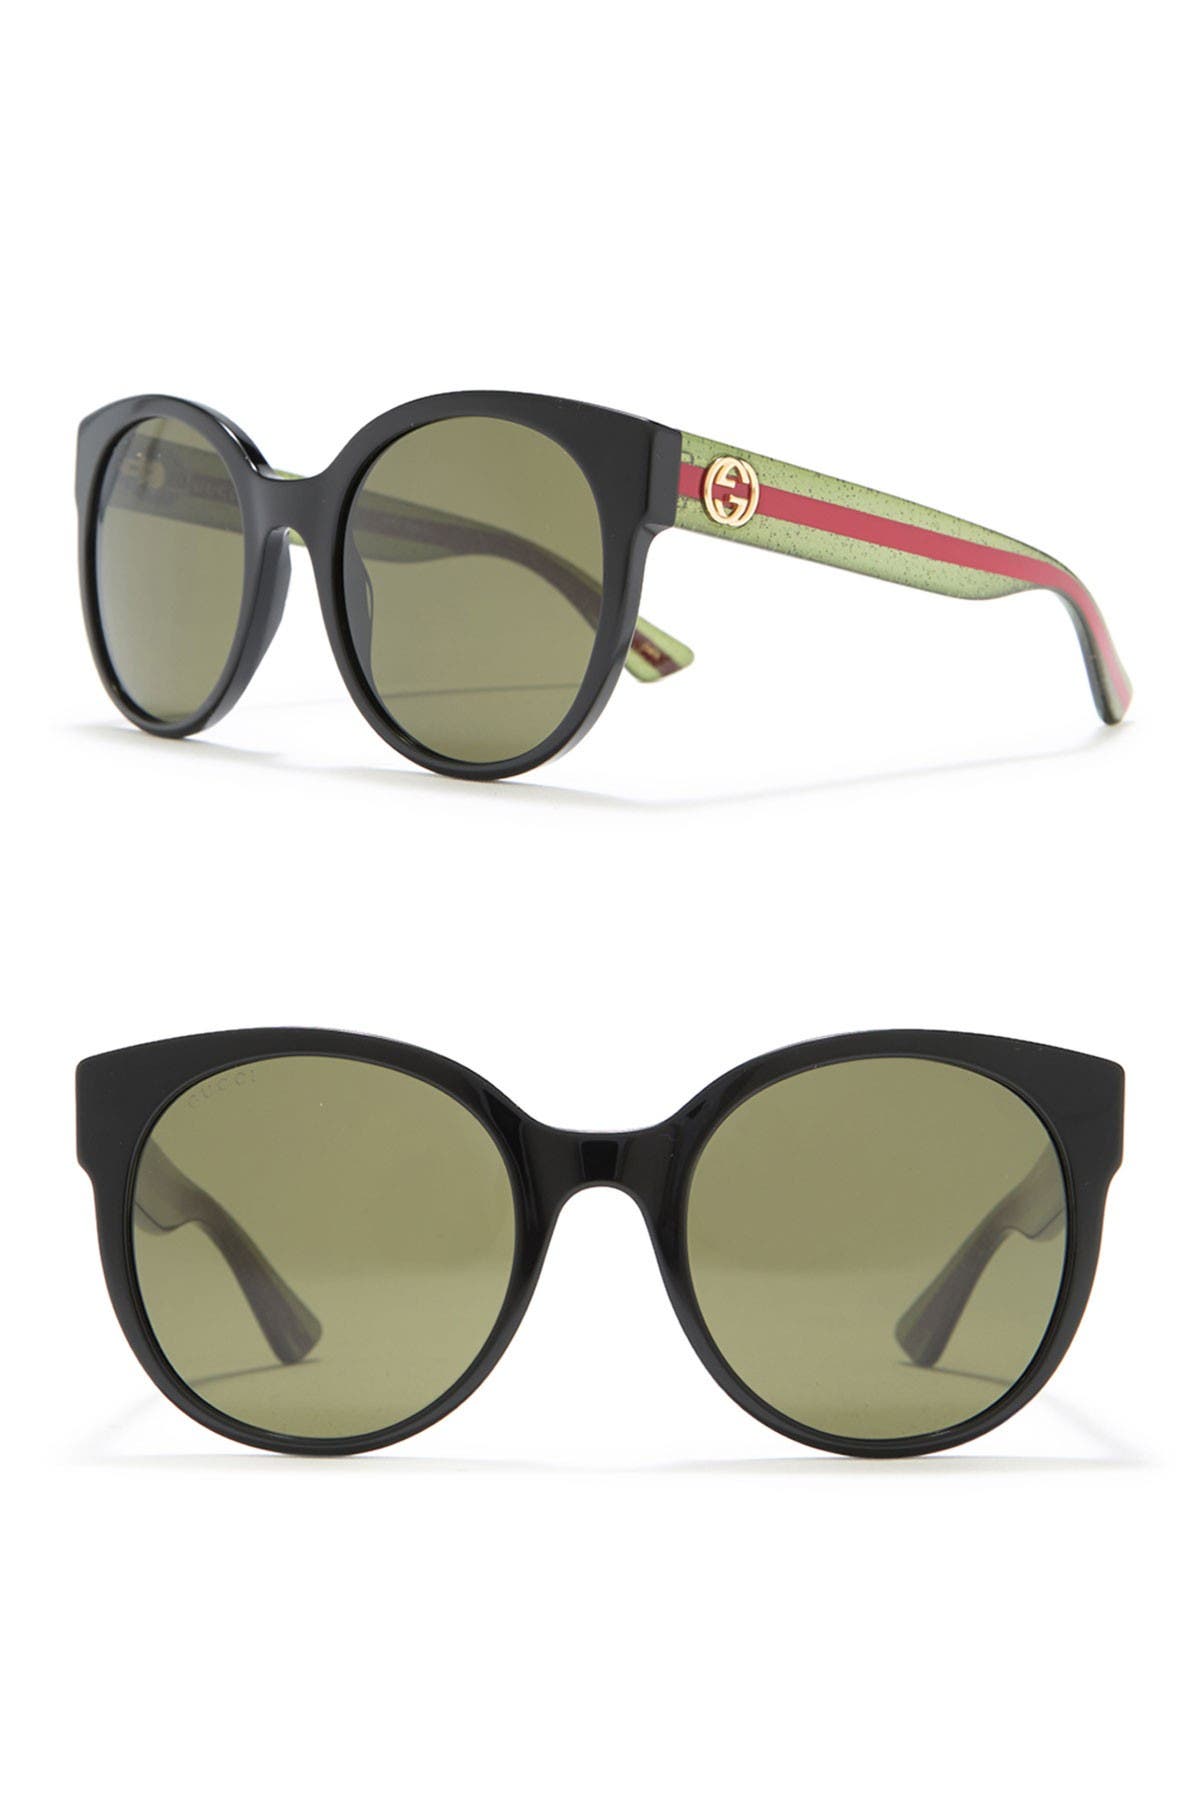 nordstrom gucci shades